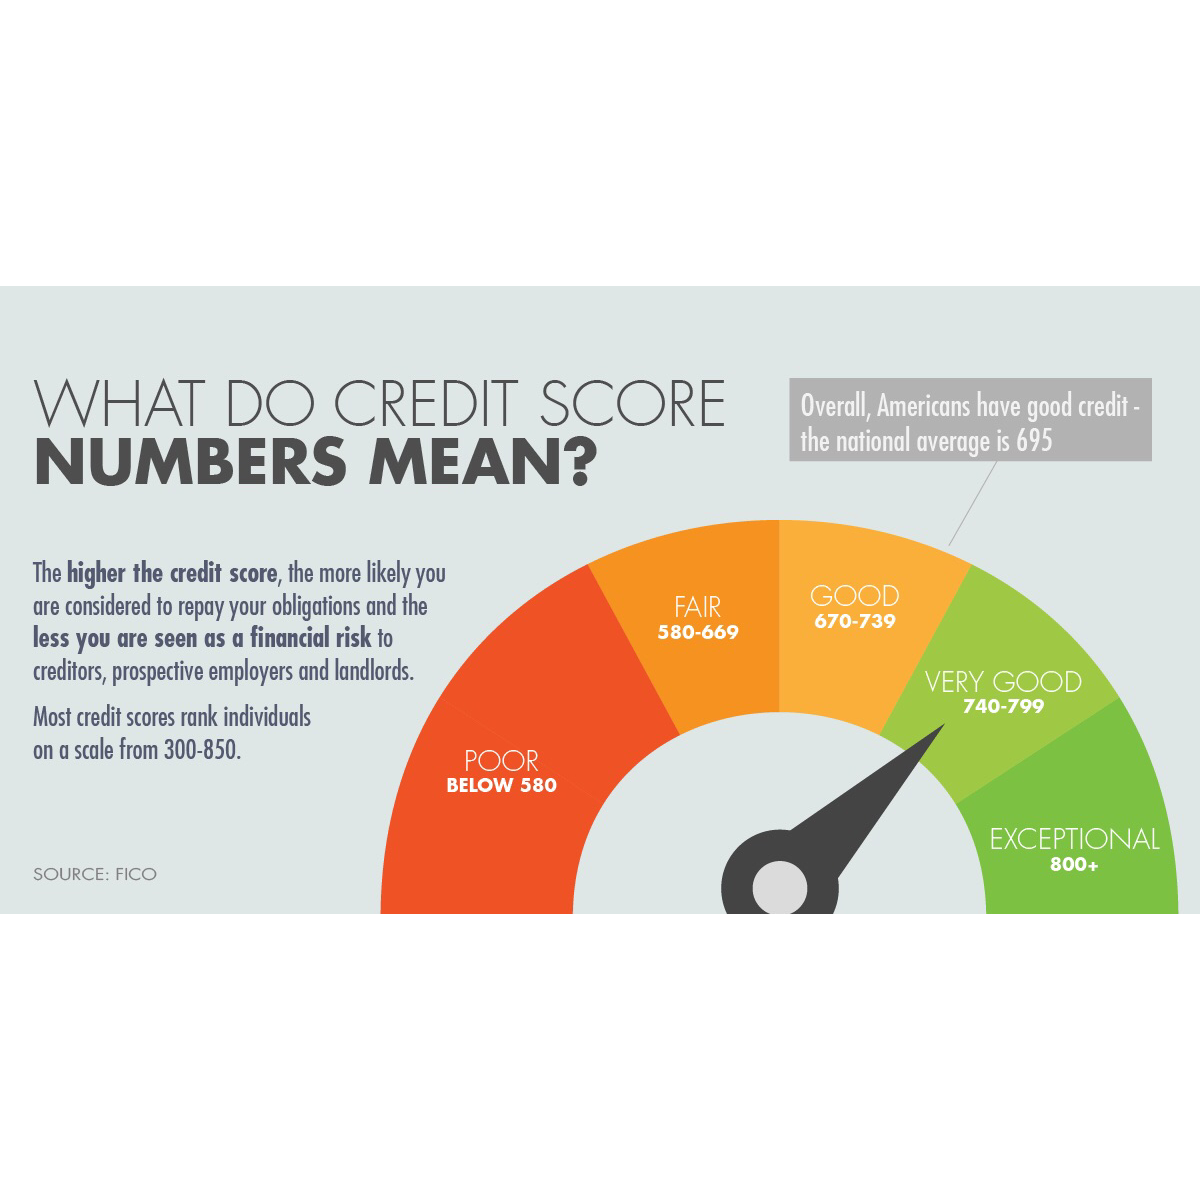 What Do Credit Score Numbers Mean?